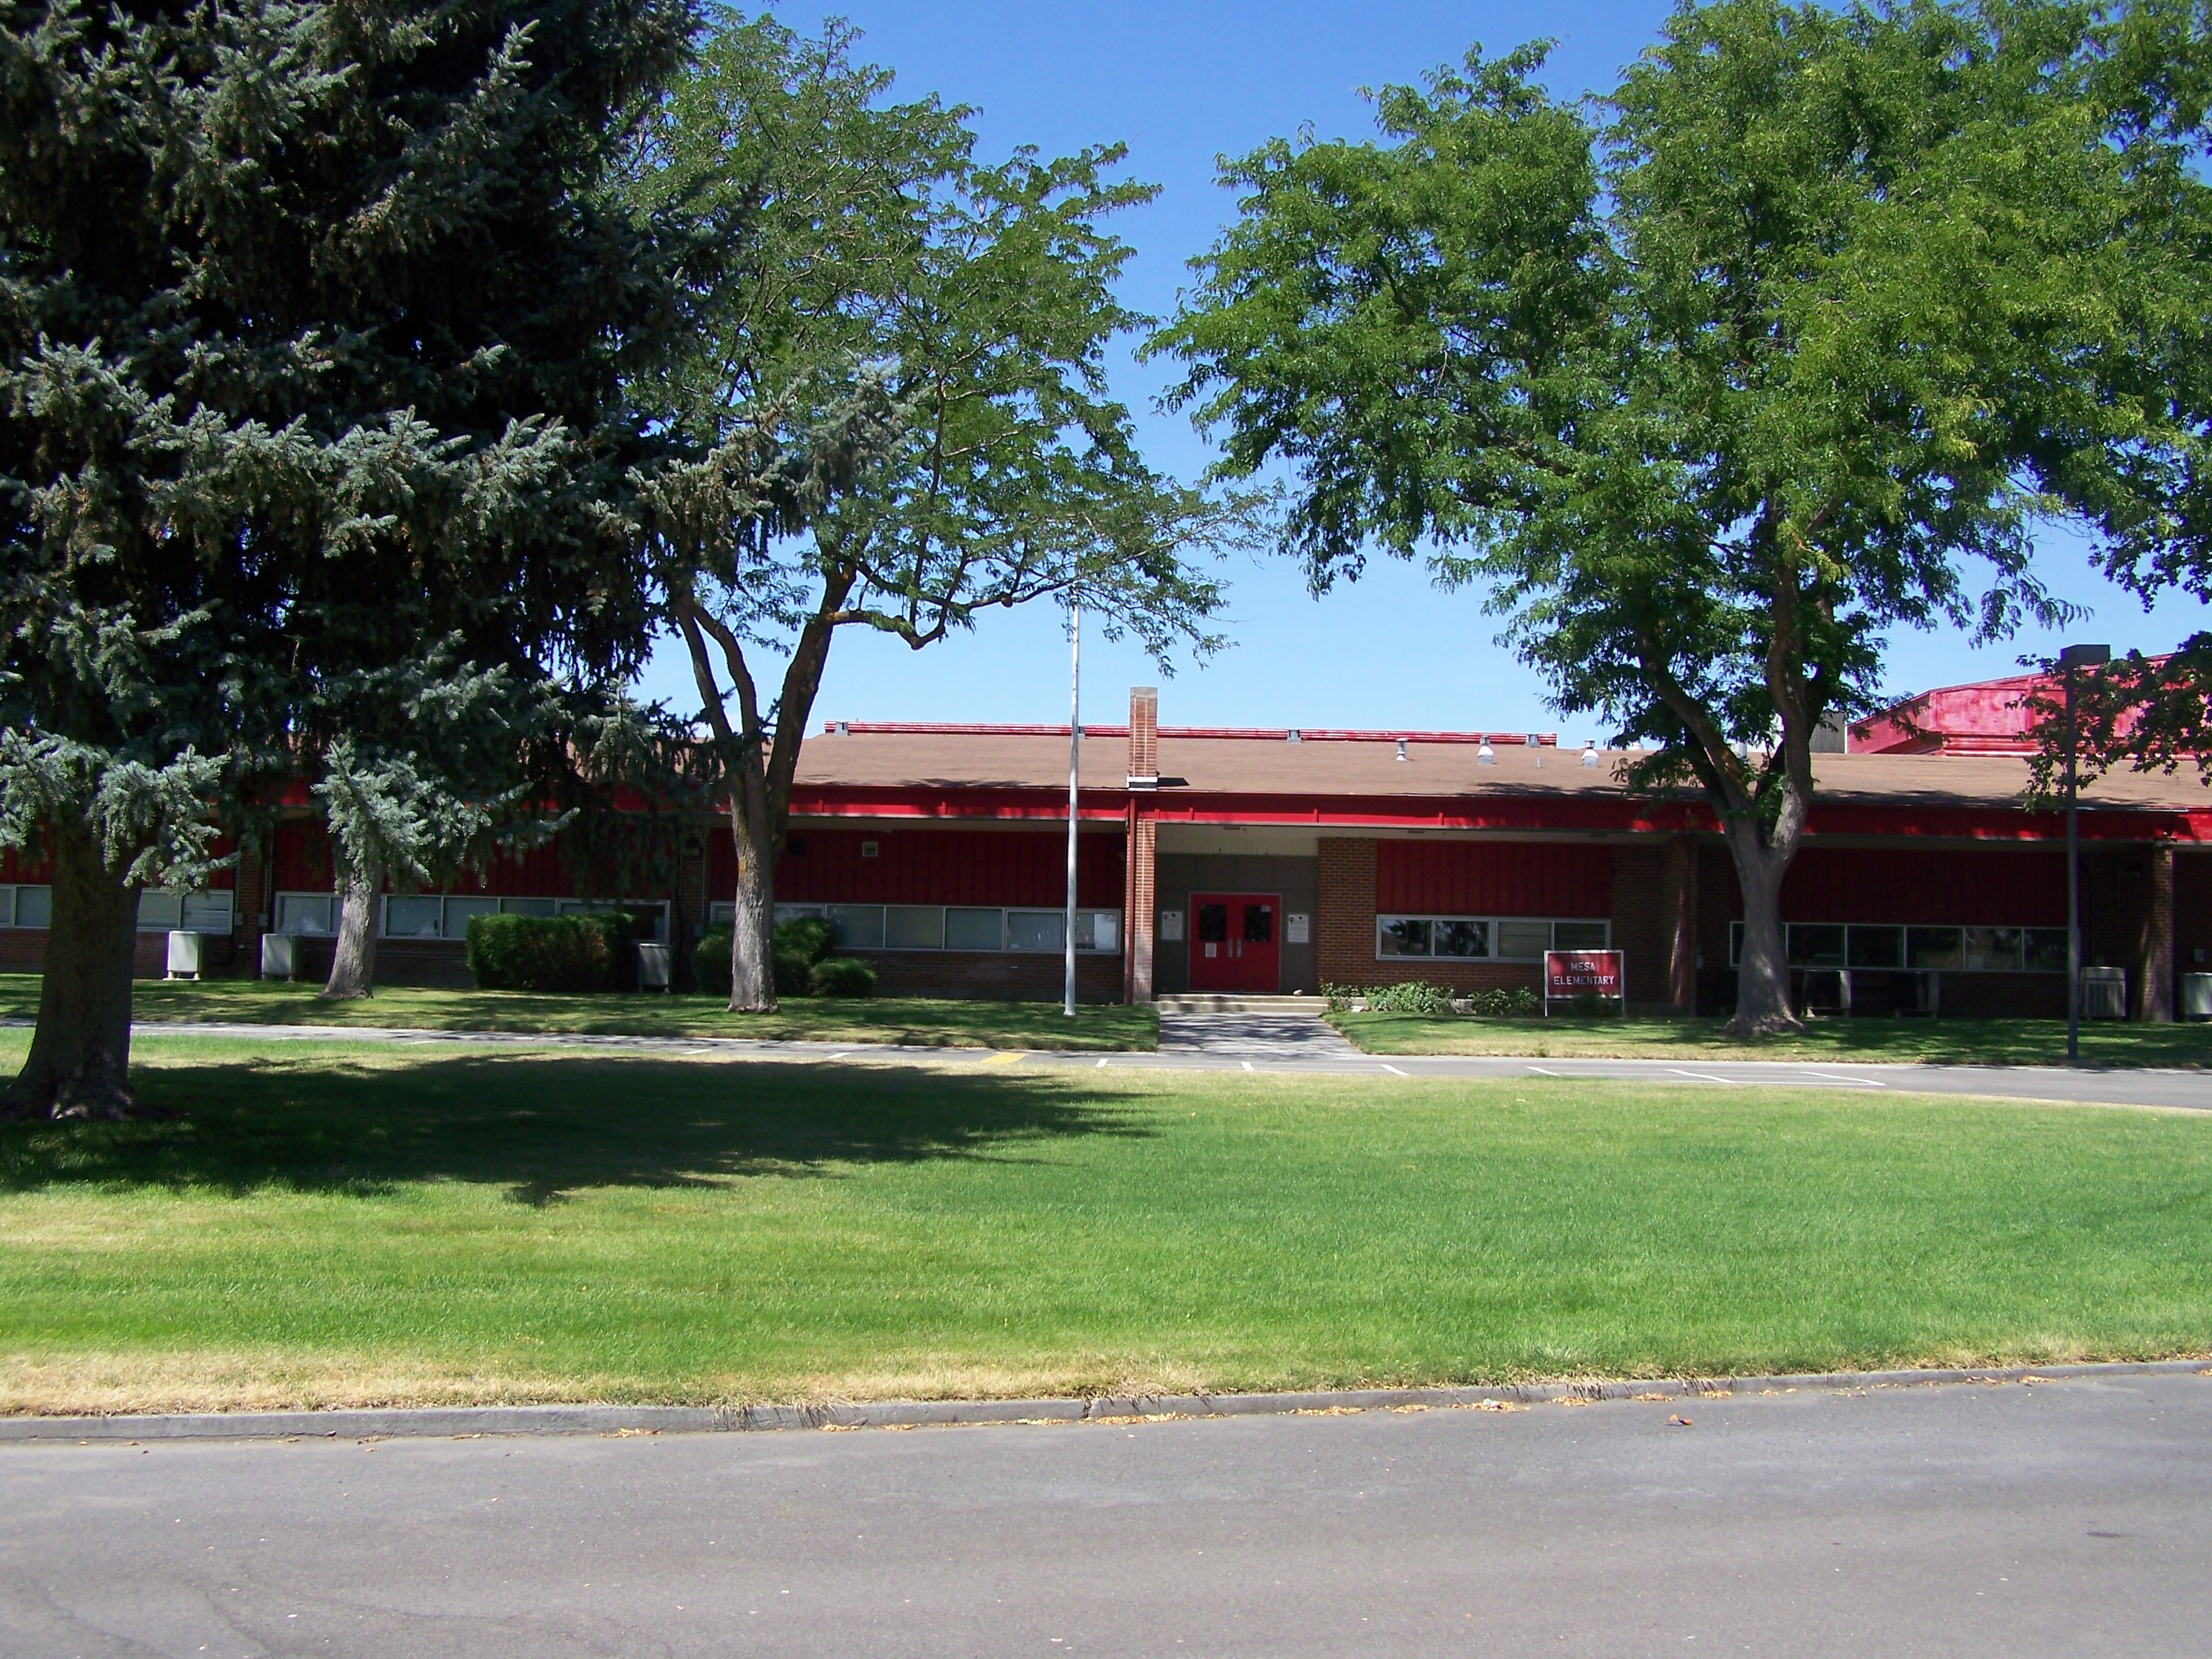 The building of MESA Elementary